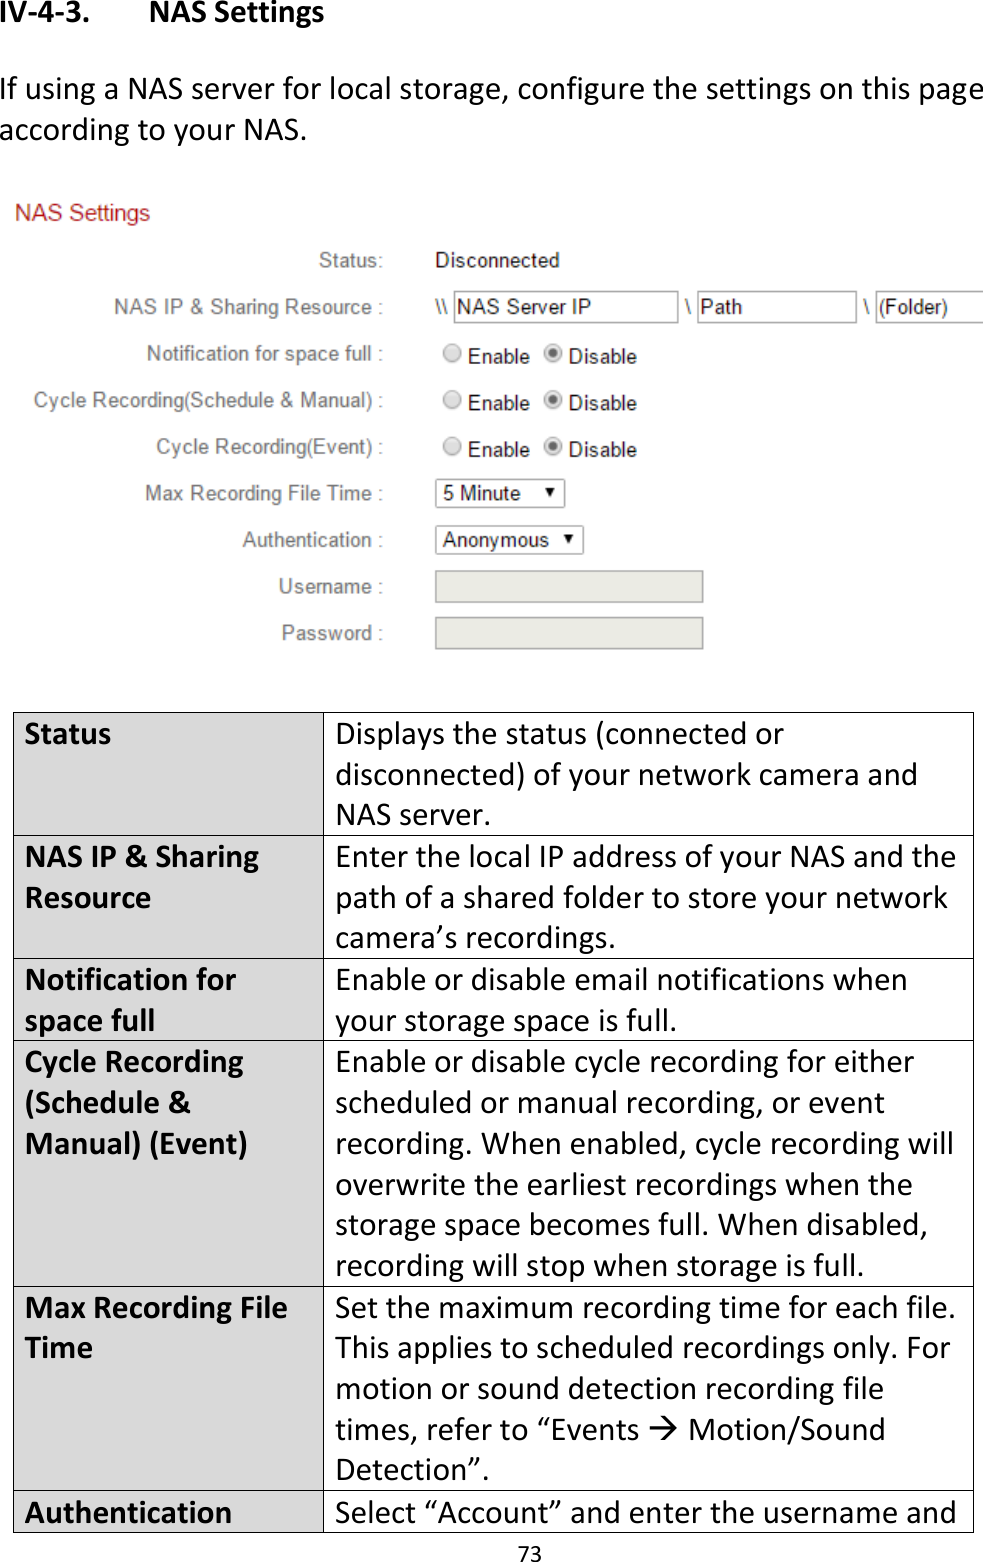 73  IV-4-3.   NAS Settings  If using a NAS server for local storage, configure the settings on this page according to your NAS.    Status Displays the status (connected or disconnected) of your network camera and NAS server. NAS IP &amp; Sharing Resource Enter the local IP address of your NAS and the path of a shared folder to store your network camera’s recordings. Notification for space full Enable or disable email notifications when your storage space is full. Cycle Recording (Schedule &amp; Manual) (Event) Enable or disable cycle recording for either scheduled or manual recording, or event recording. When enabled, cycle recording will overwrite the earliest recordings when the storage space becomes full. When disabled, recording will stop when storage is full. Max Recording File Time Set the maximum recording time for each file. This applies to scheduled recordings only. For motion or sound detection recording file times, refer to “Events  Motion/Sound Detection”.  Authentication Select “Account” and enter the username and 